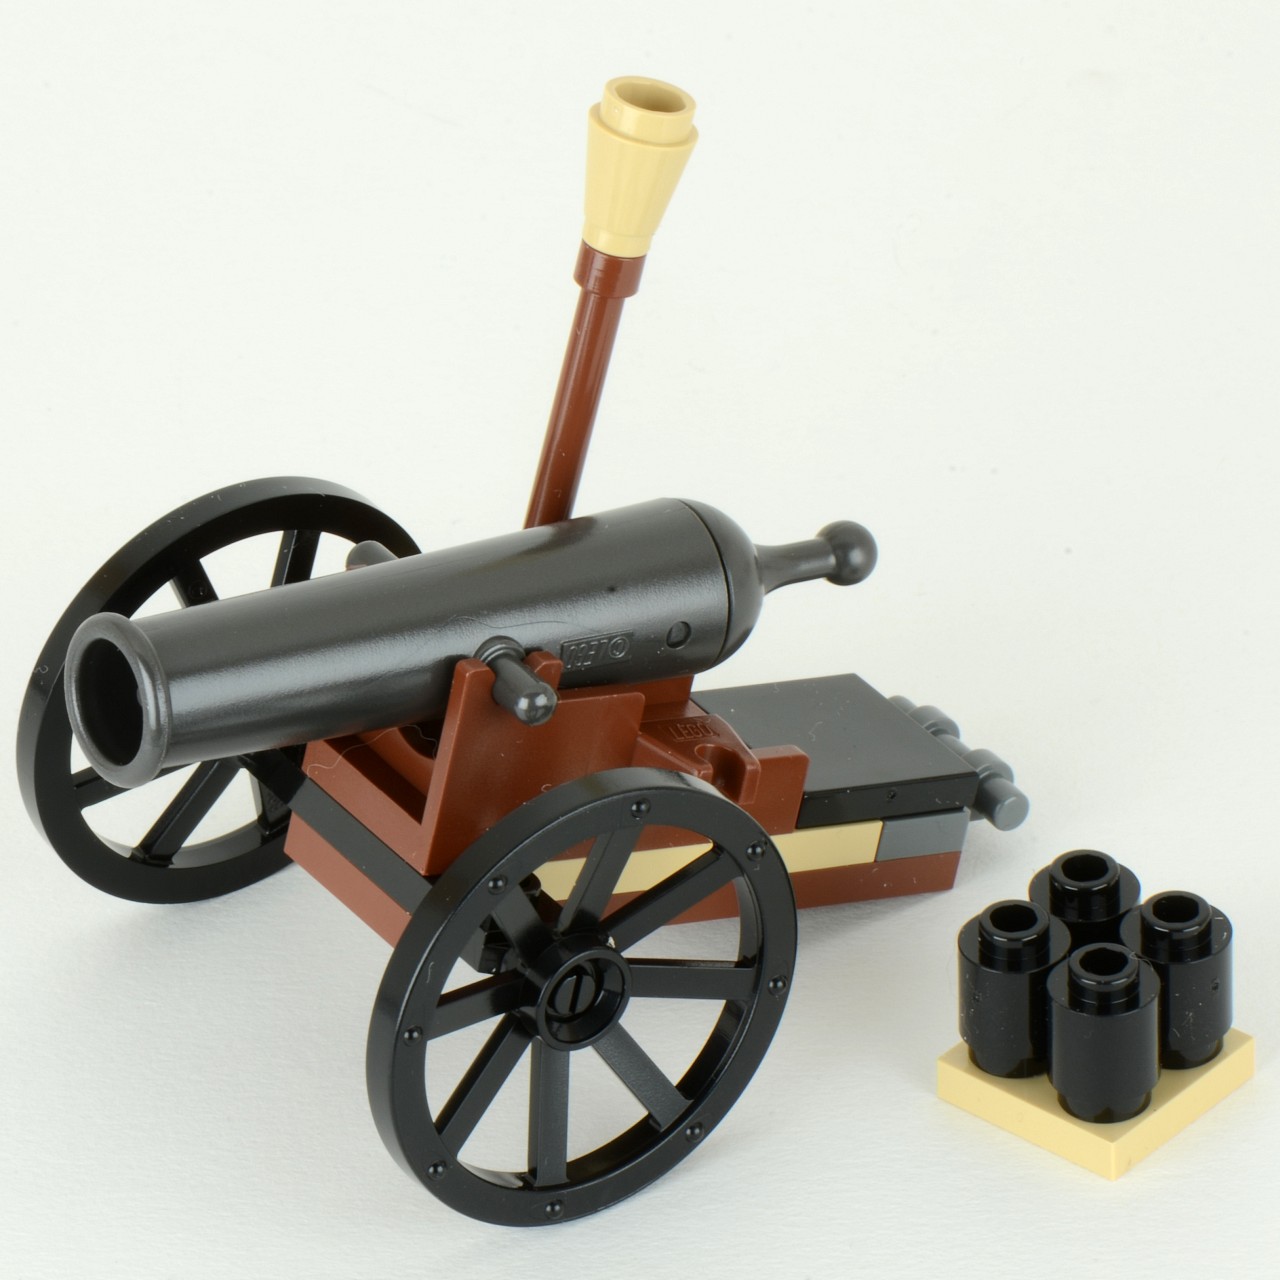 a model toy cannon with five black rubber tires